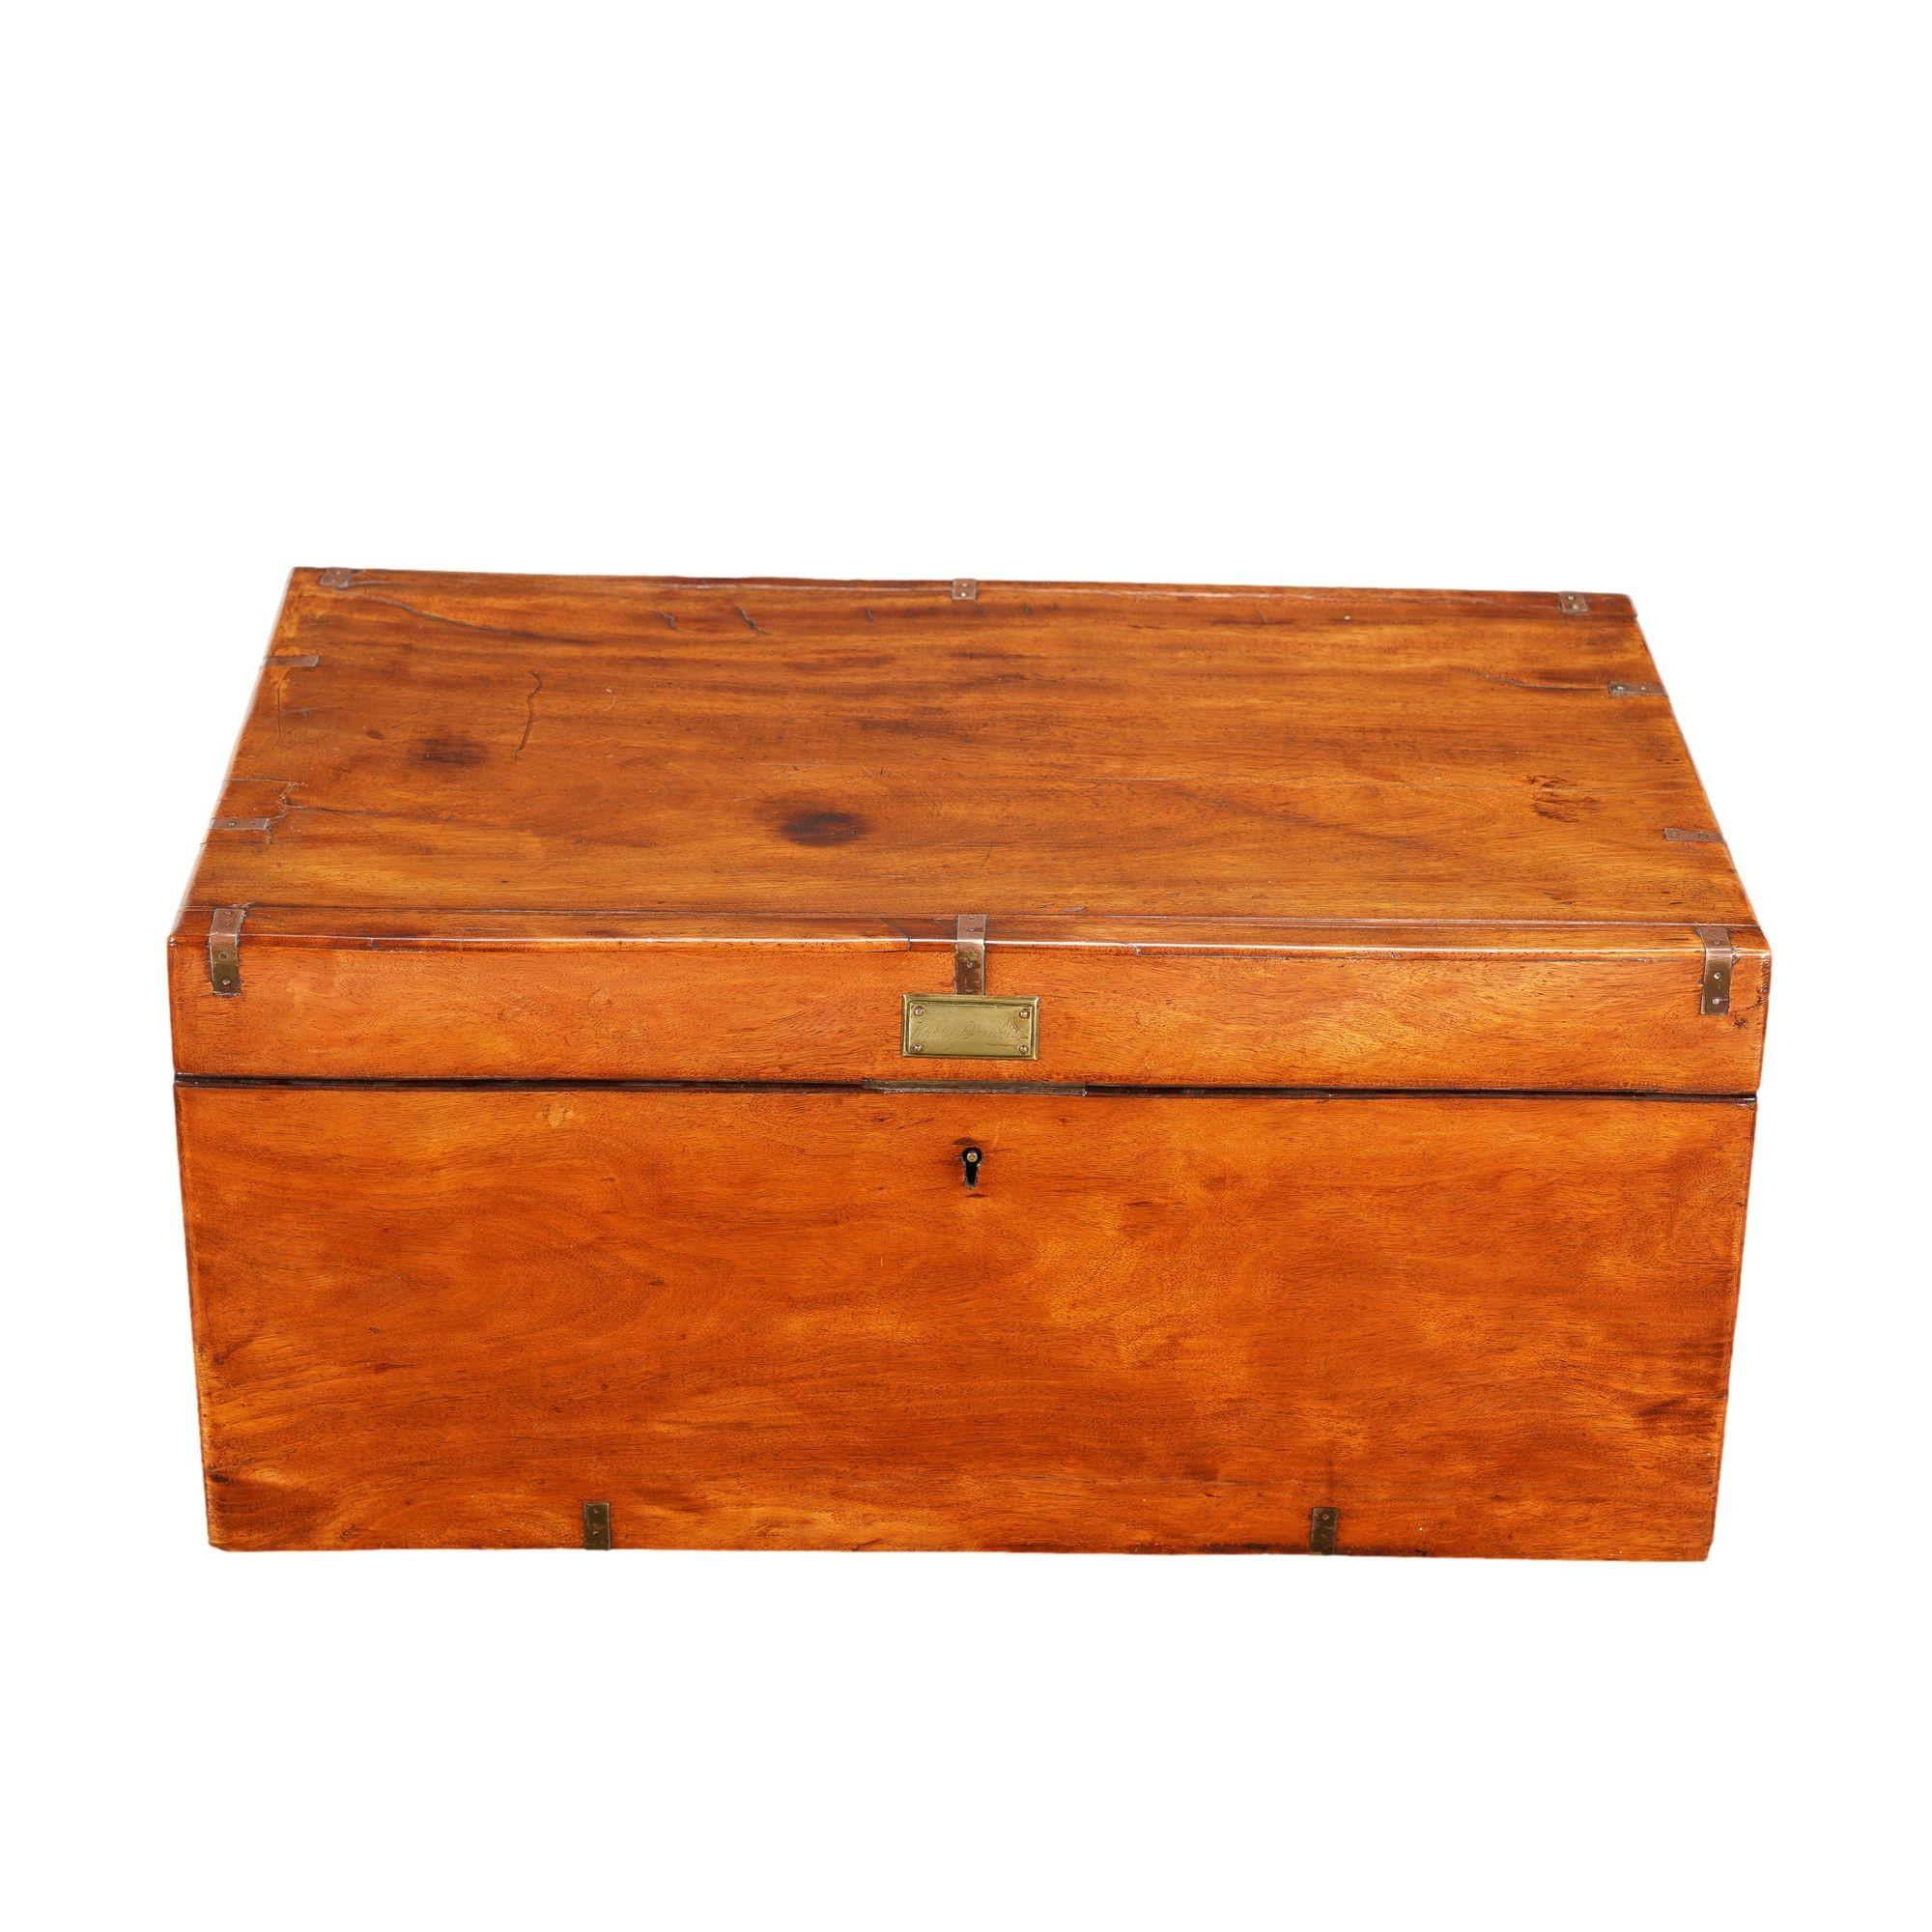 British officers foot locker in mahogany with brass strap reinforcements and an exceptionally thick, reinforced lid. The brass plate above the lock on the face of the trunk is engraved with the name 